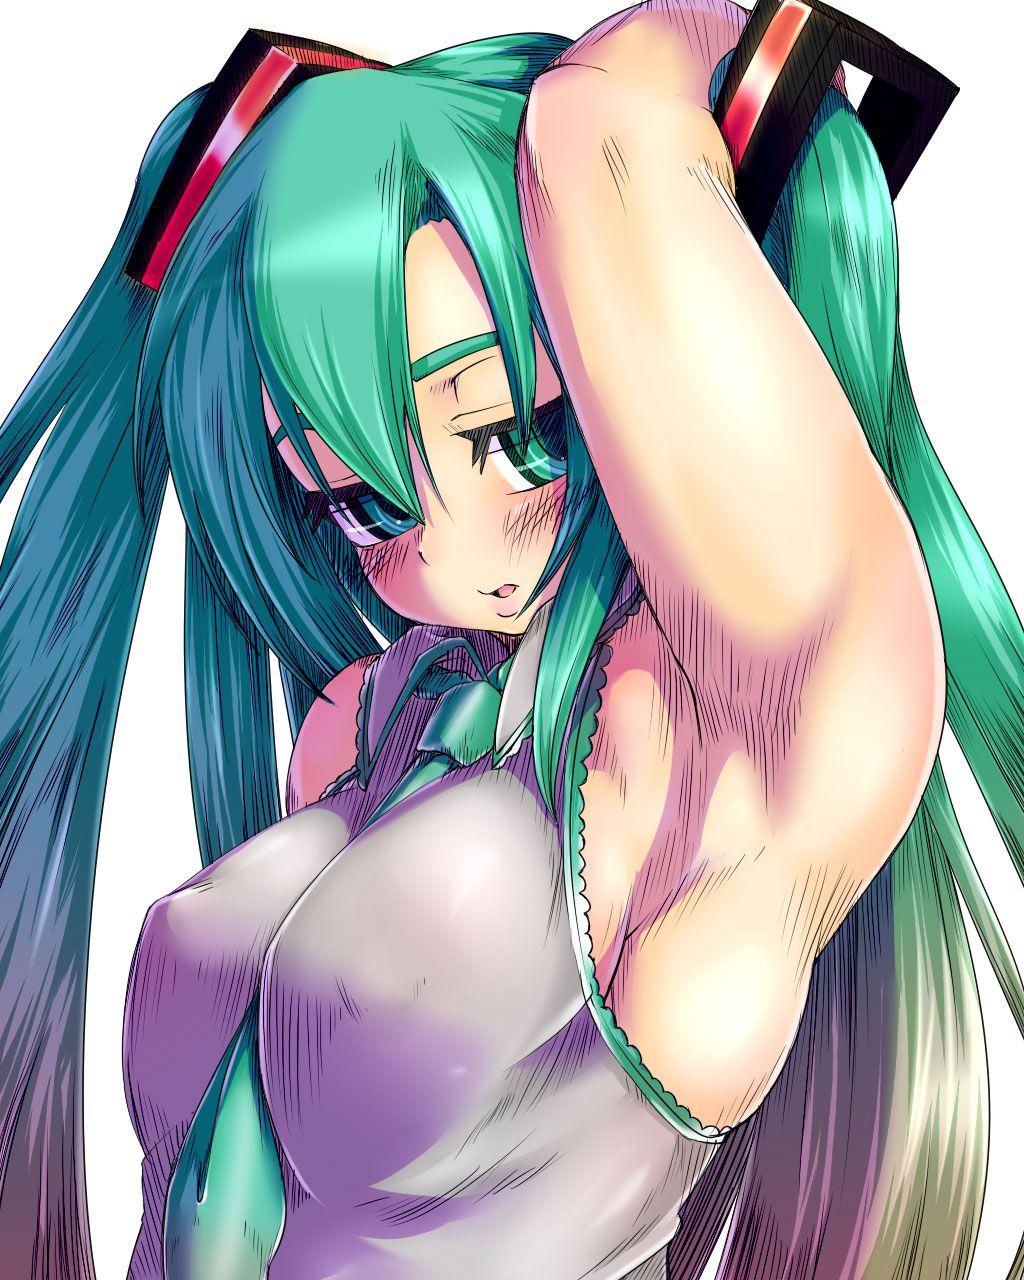 2D Banzai and the girl 47 sheets that the armpit becomes full view 33